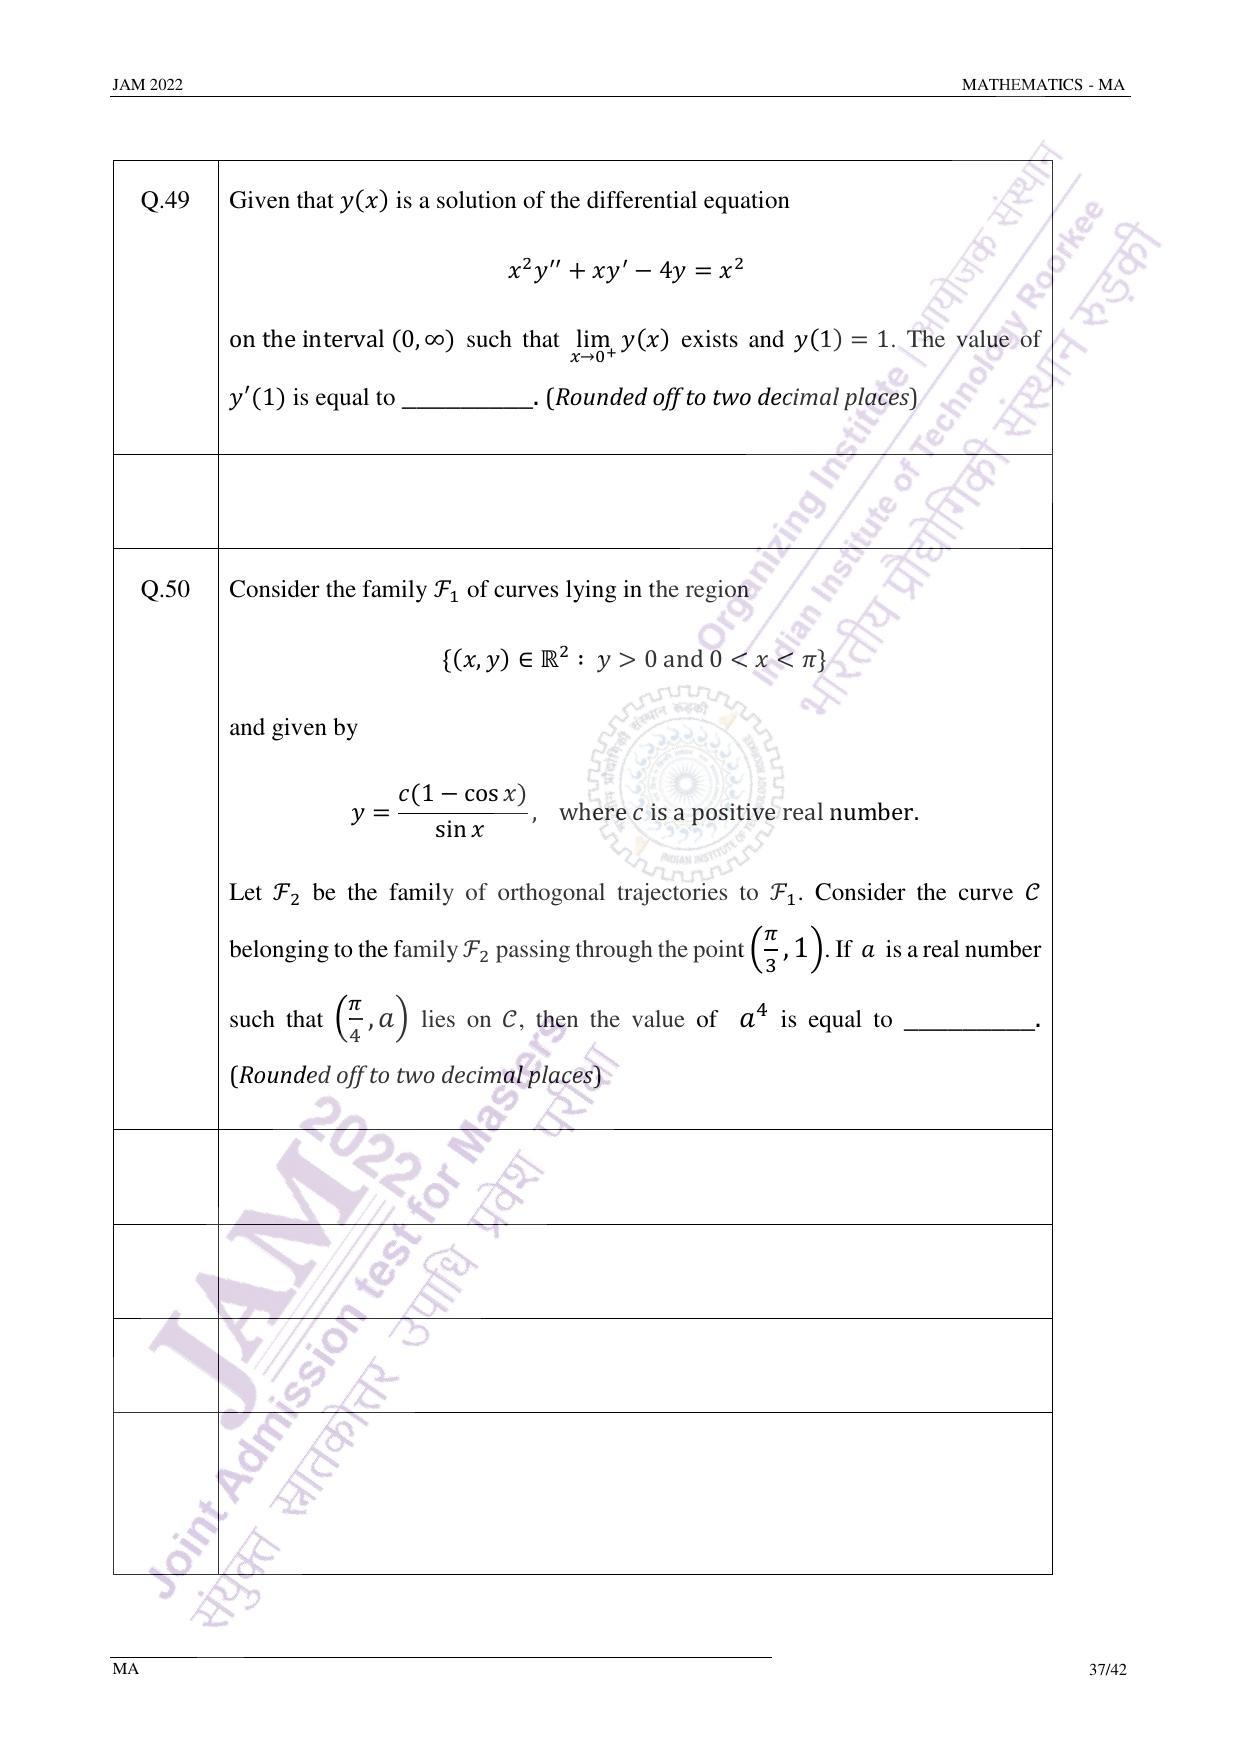 JAM 2022: MA Question Paper - Page 37